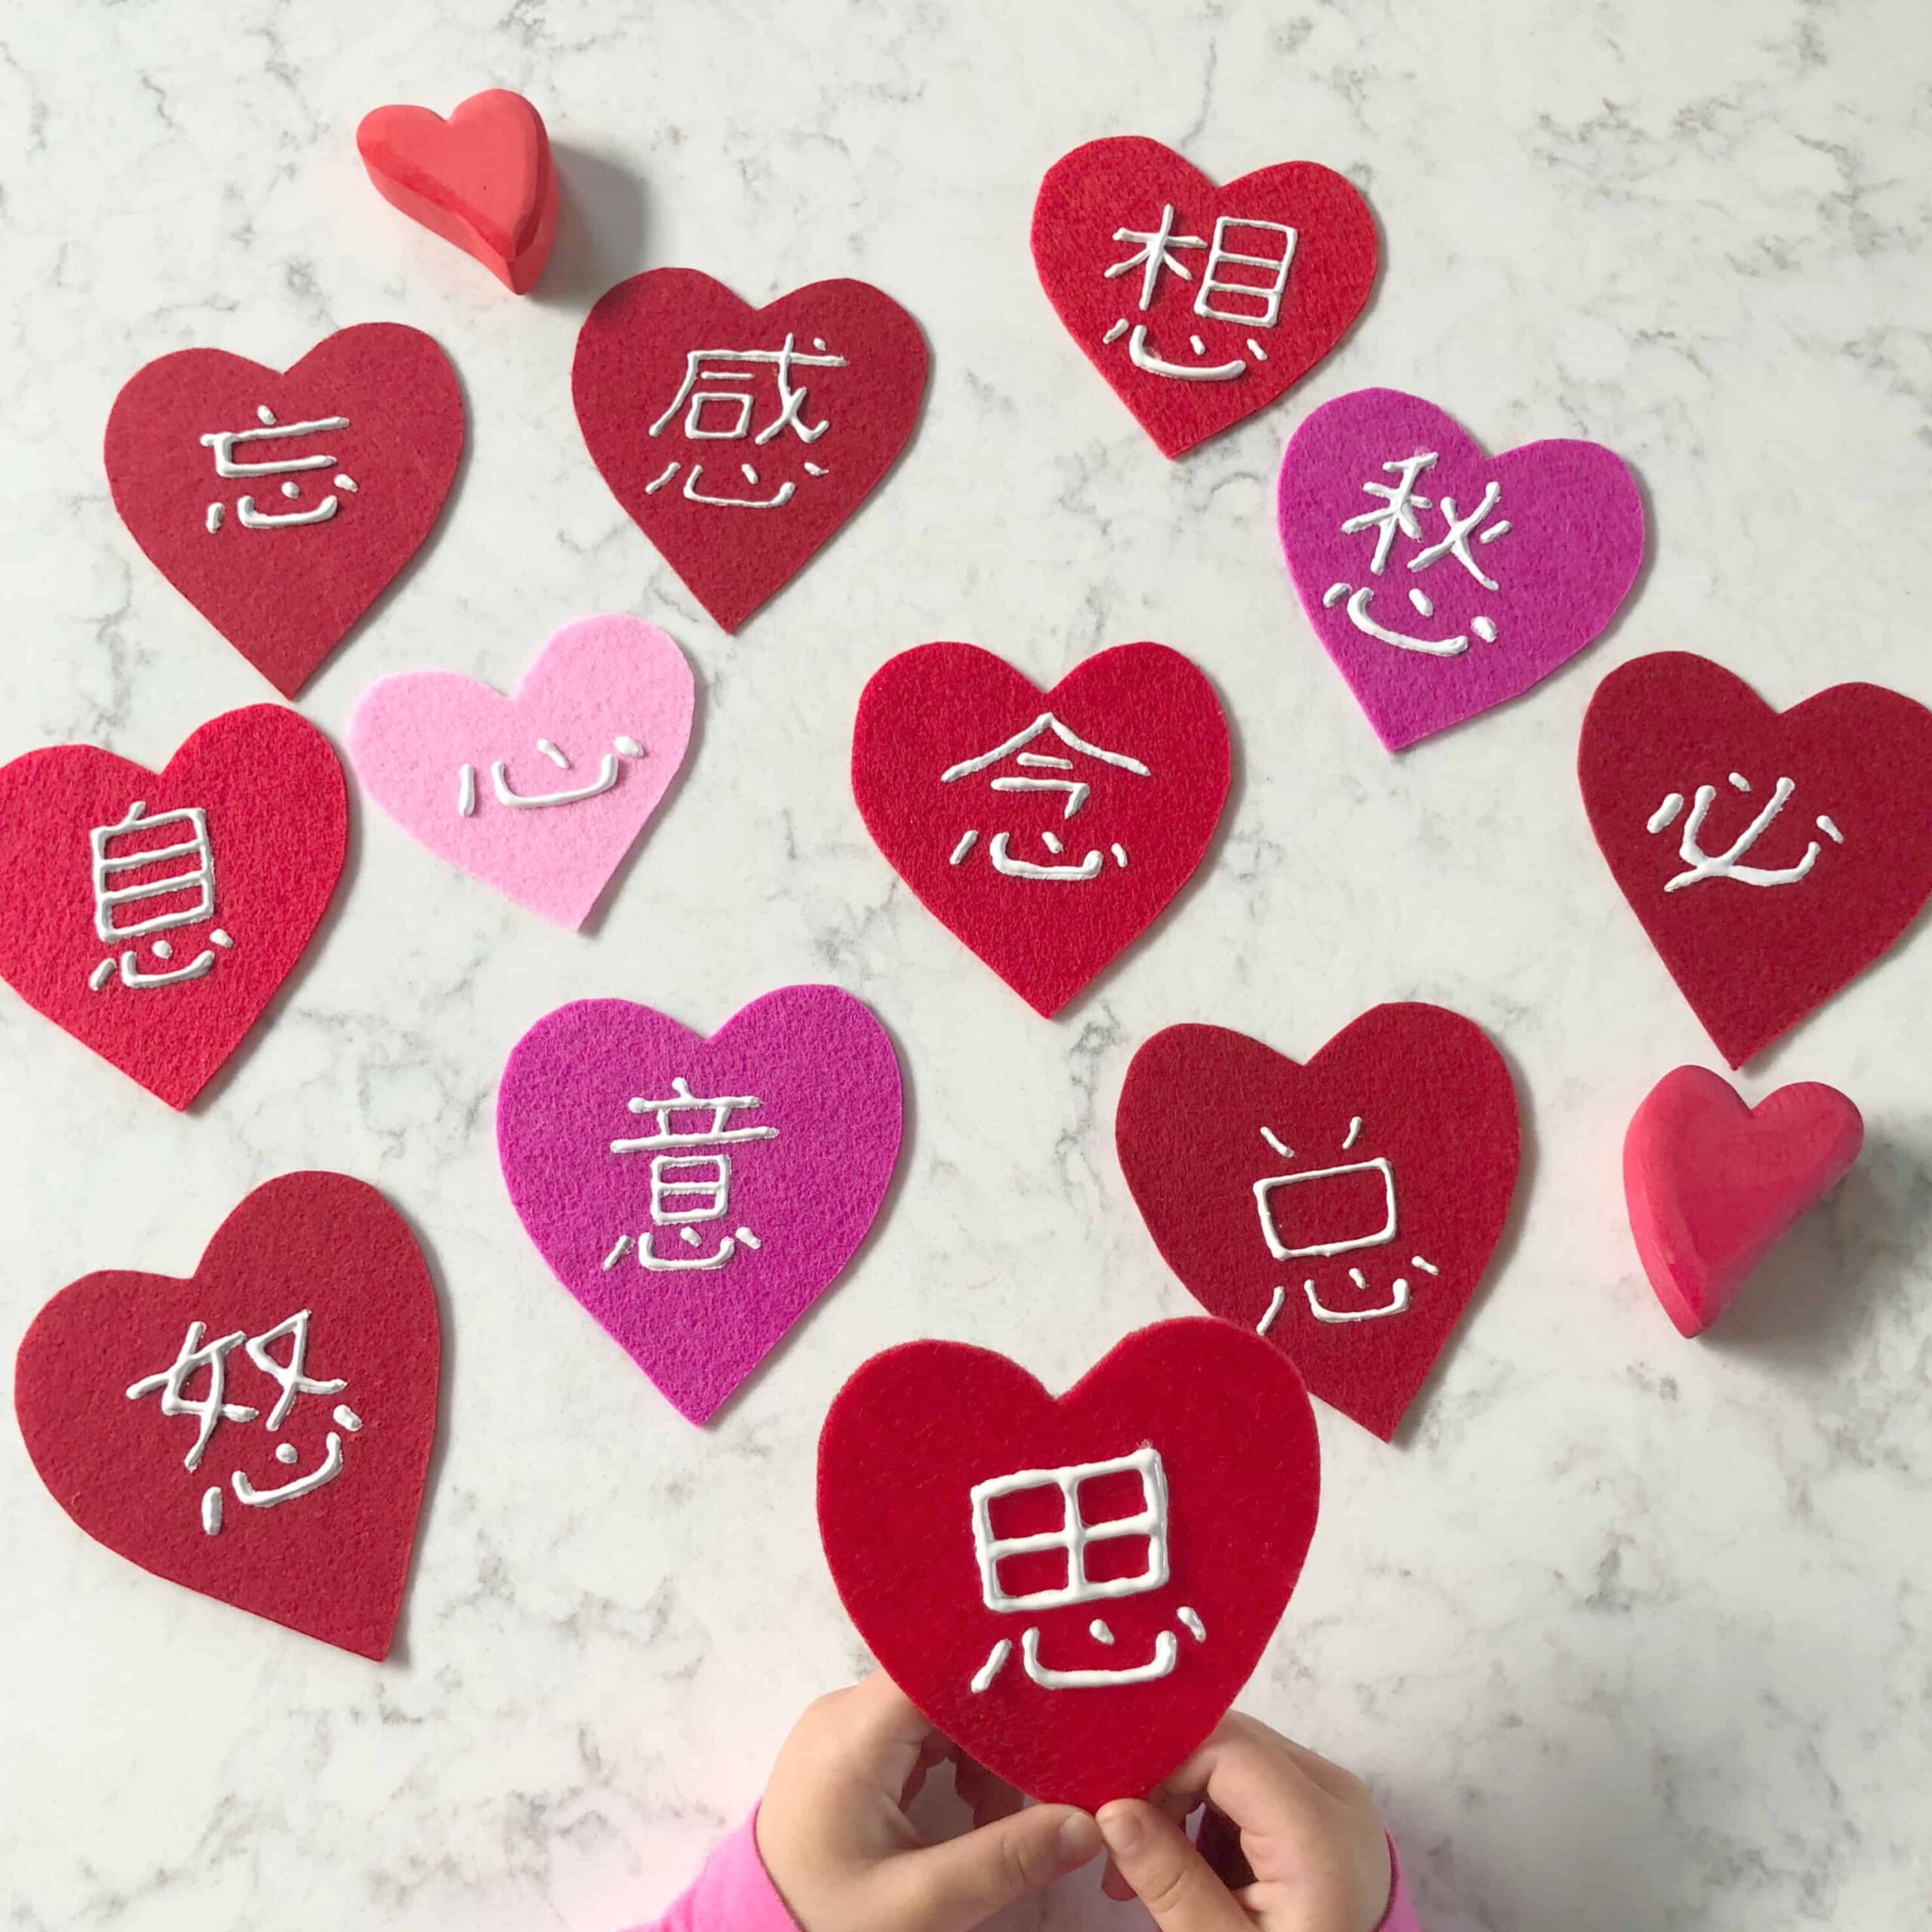 6 Activities to Teach Chinese Characters with 心 Heart Radical!